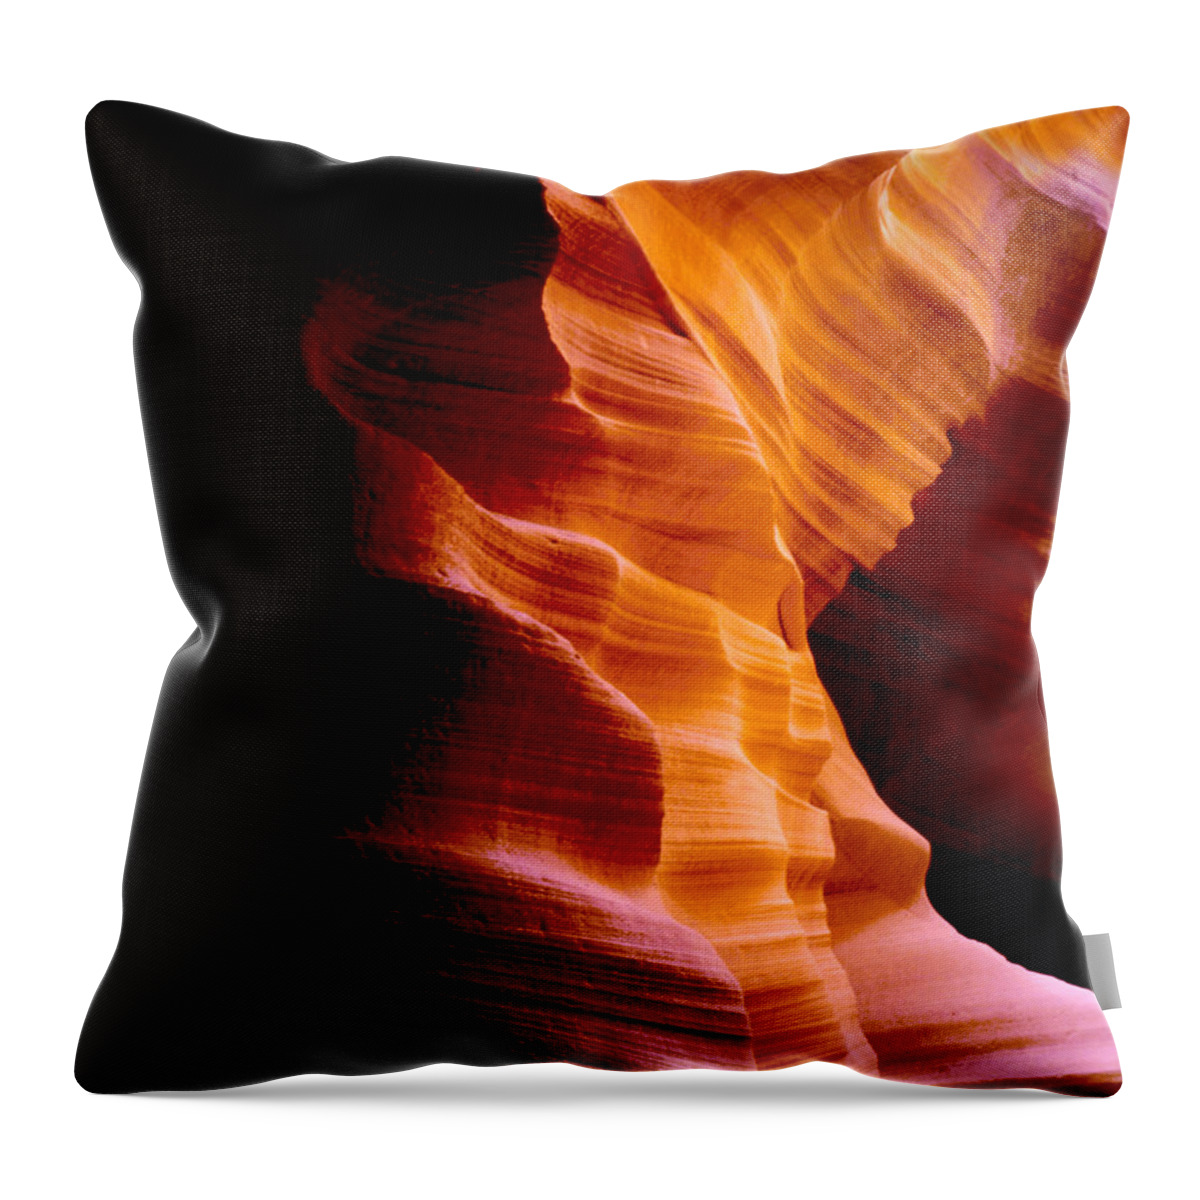 Antelope Canyon Throw Pillow featuring the pyrography Golden Abyss of Antelope Canyon by Joe Hoover